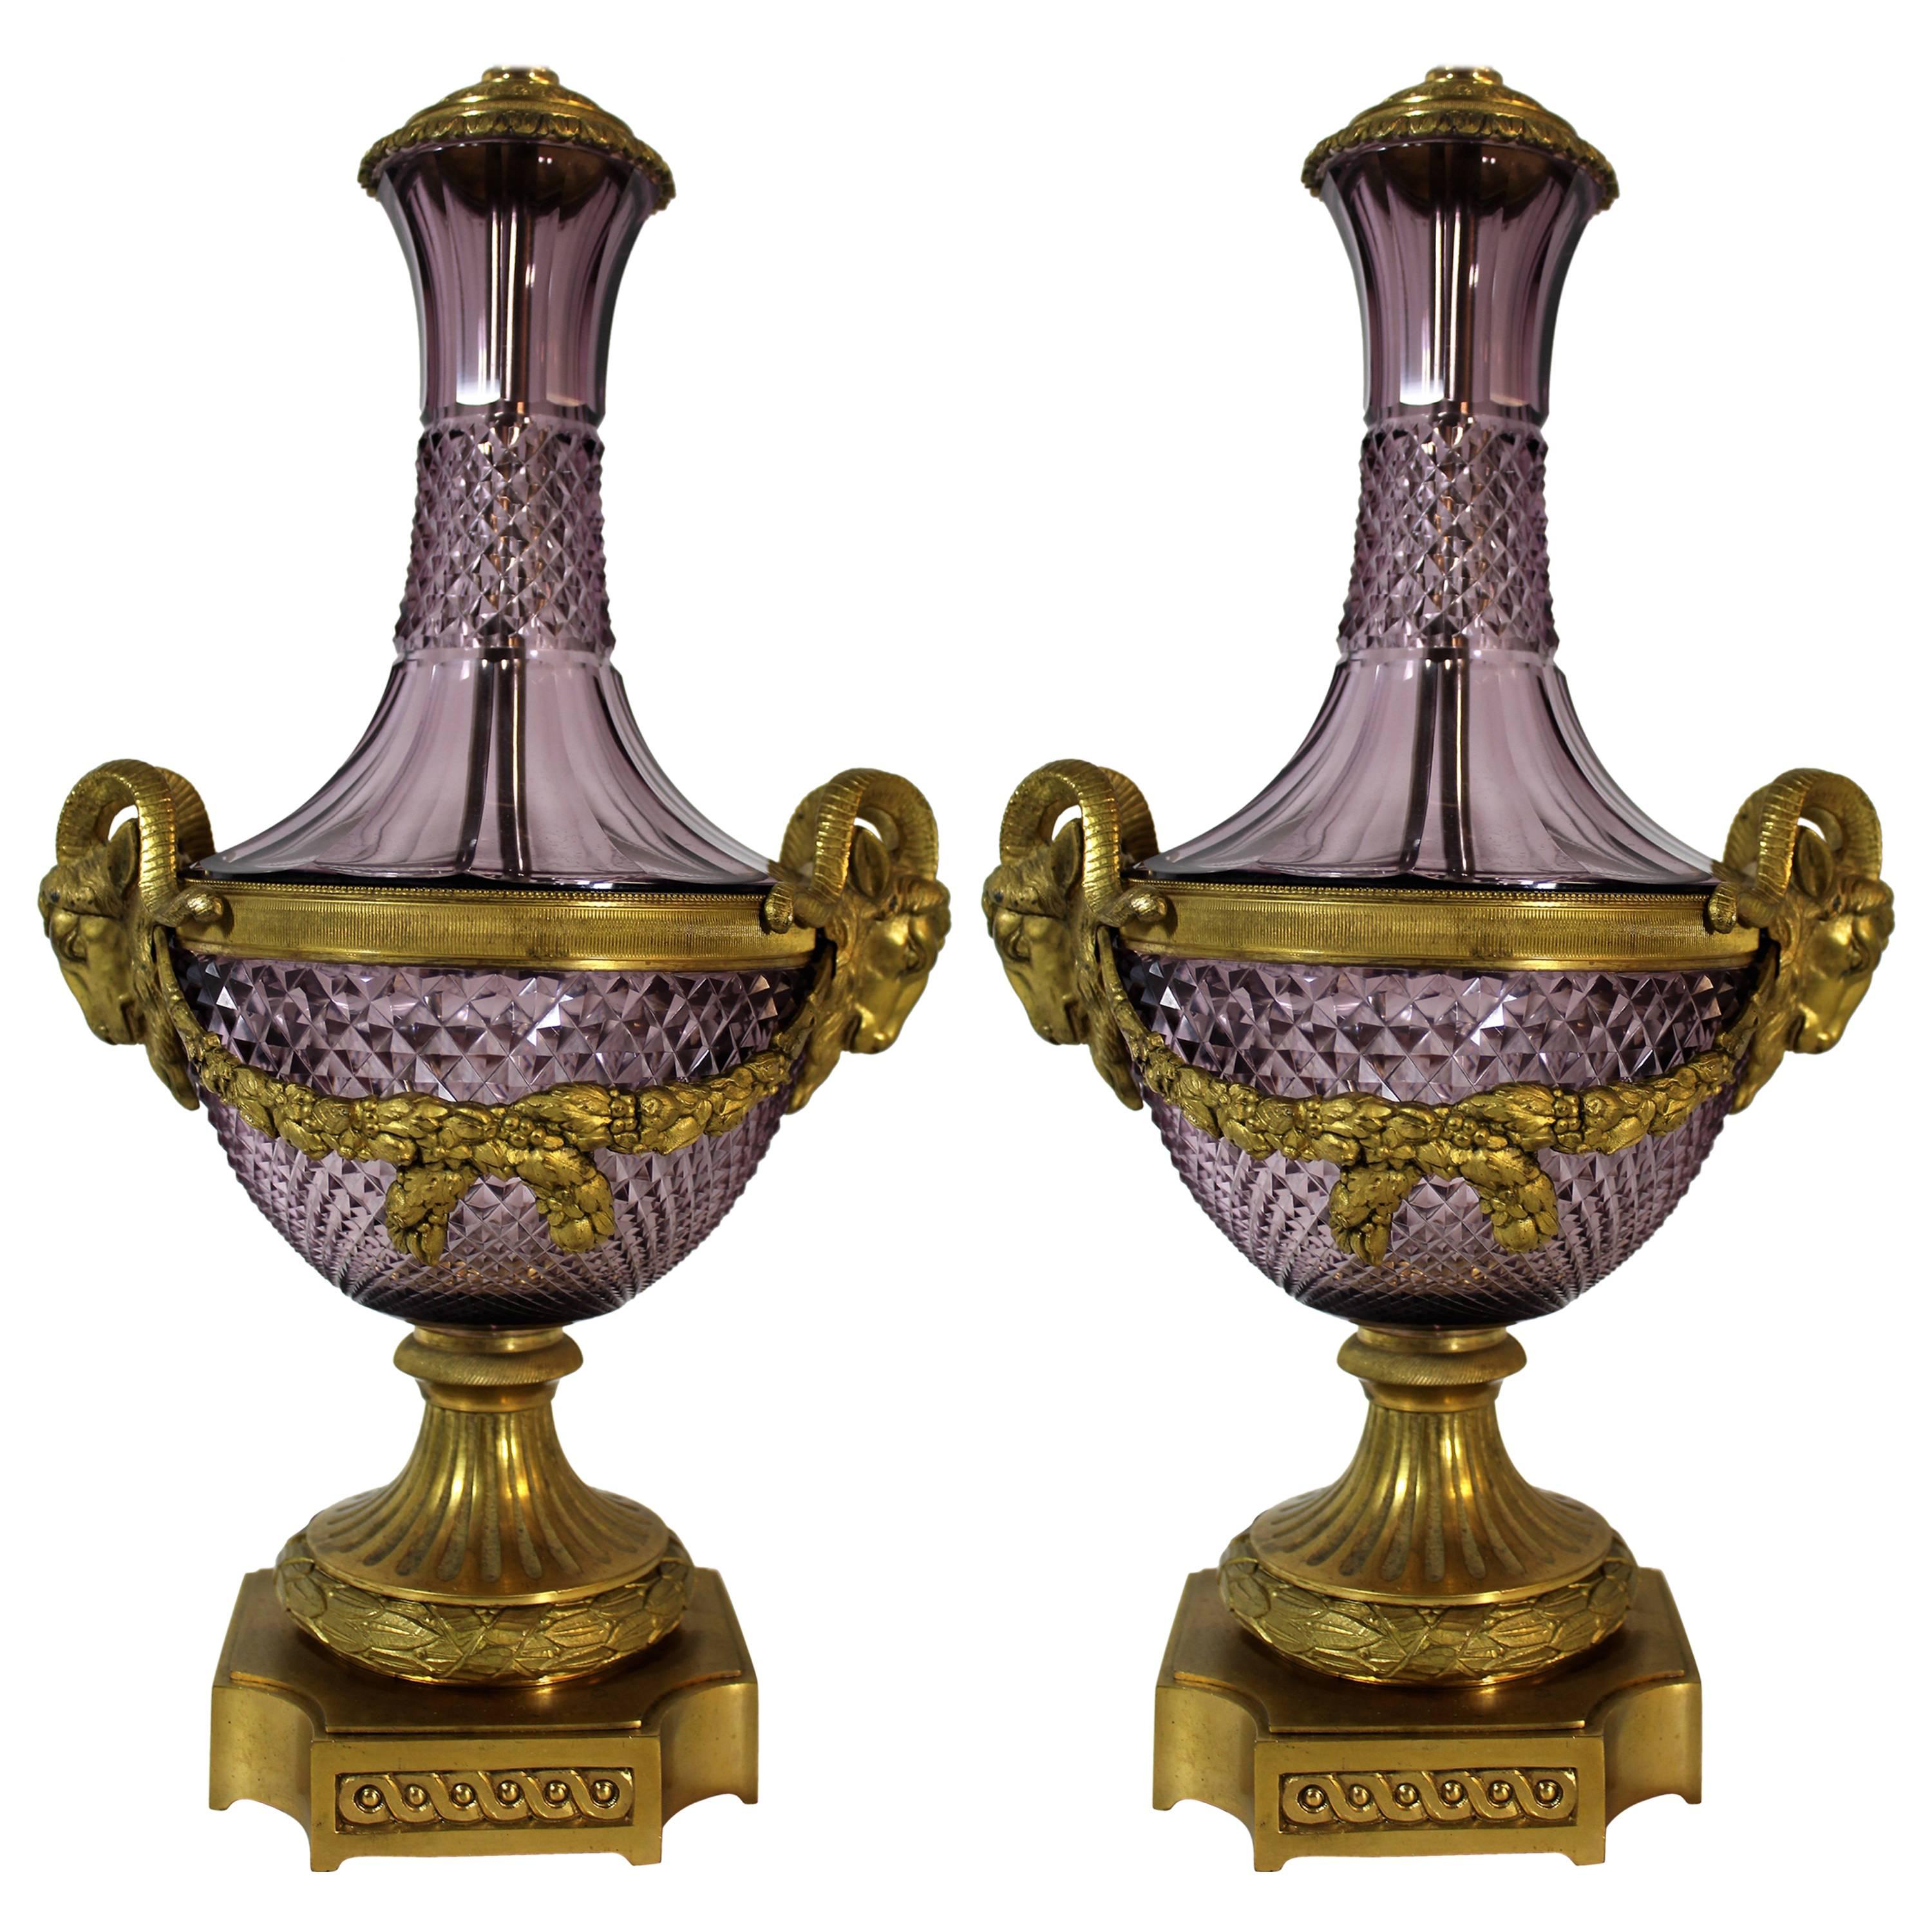 Pair of Baccarat Lamps with Amethyst Color Crystal and Gilt Bronze Mounts